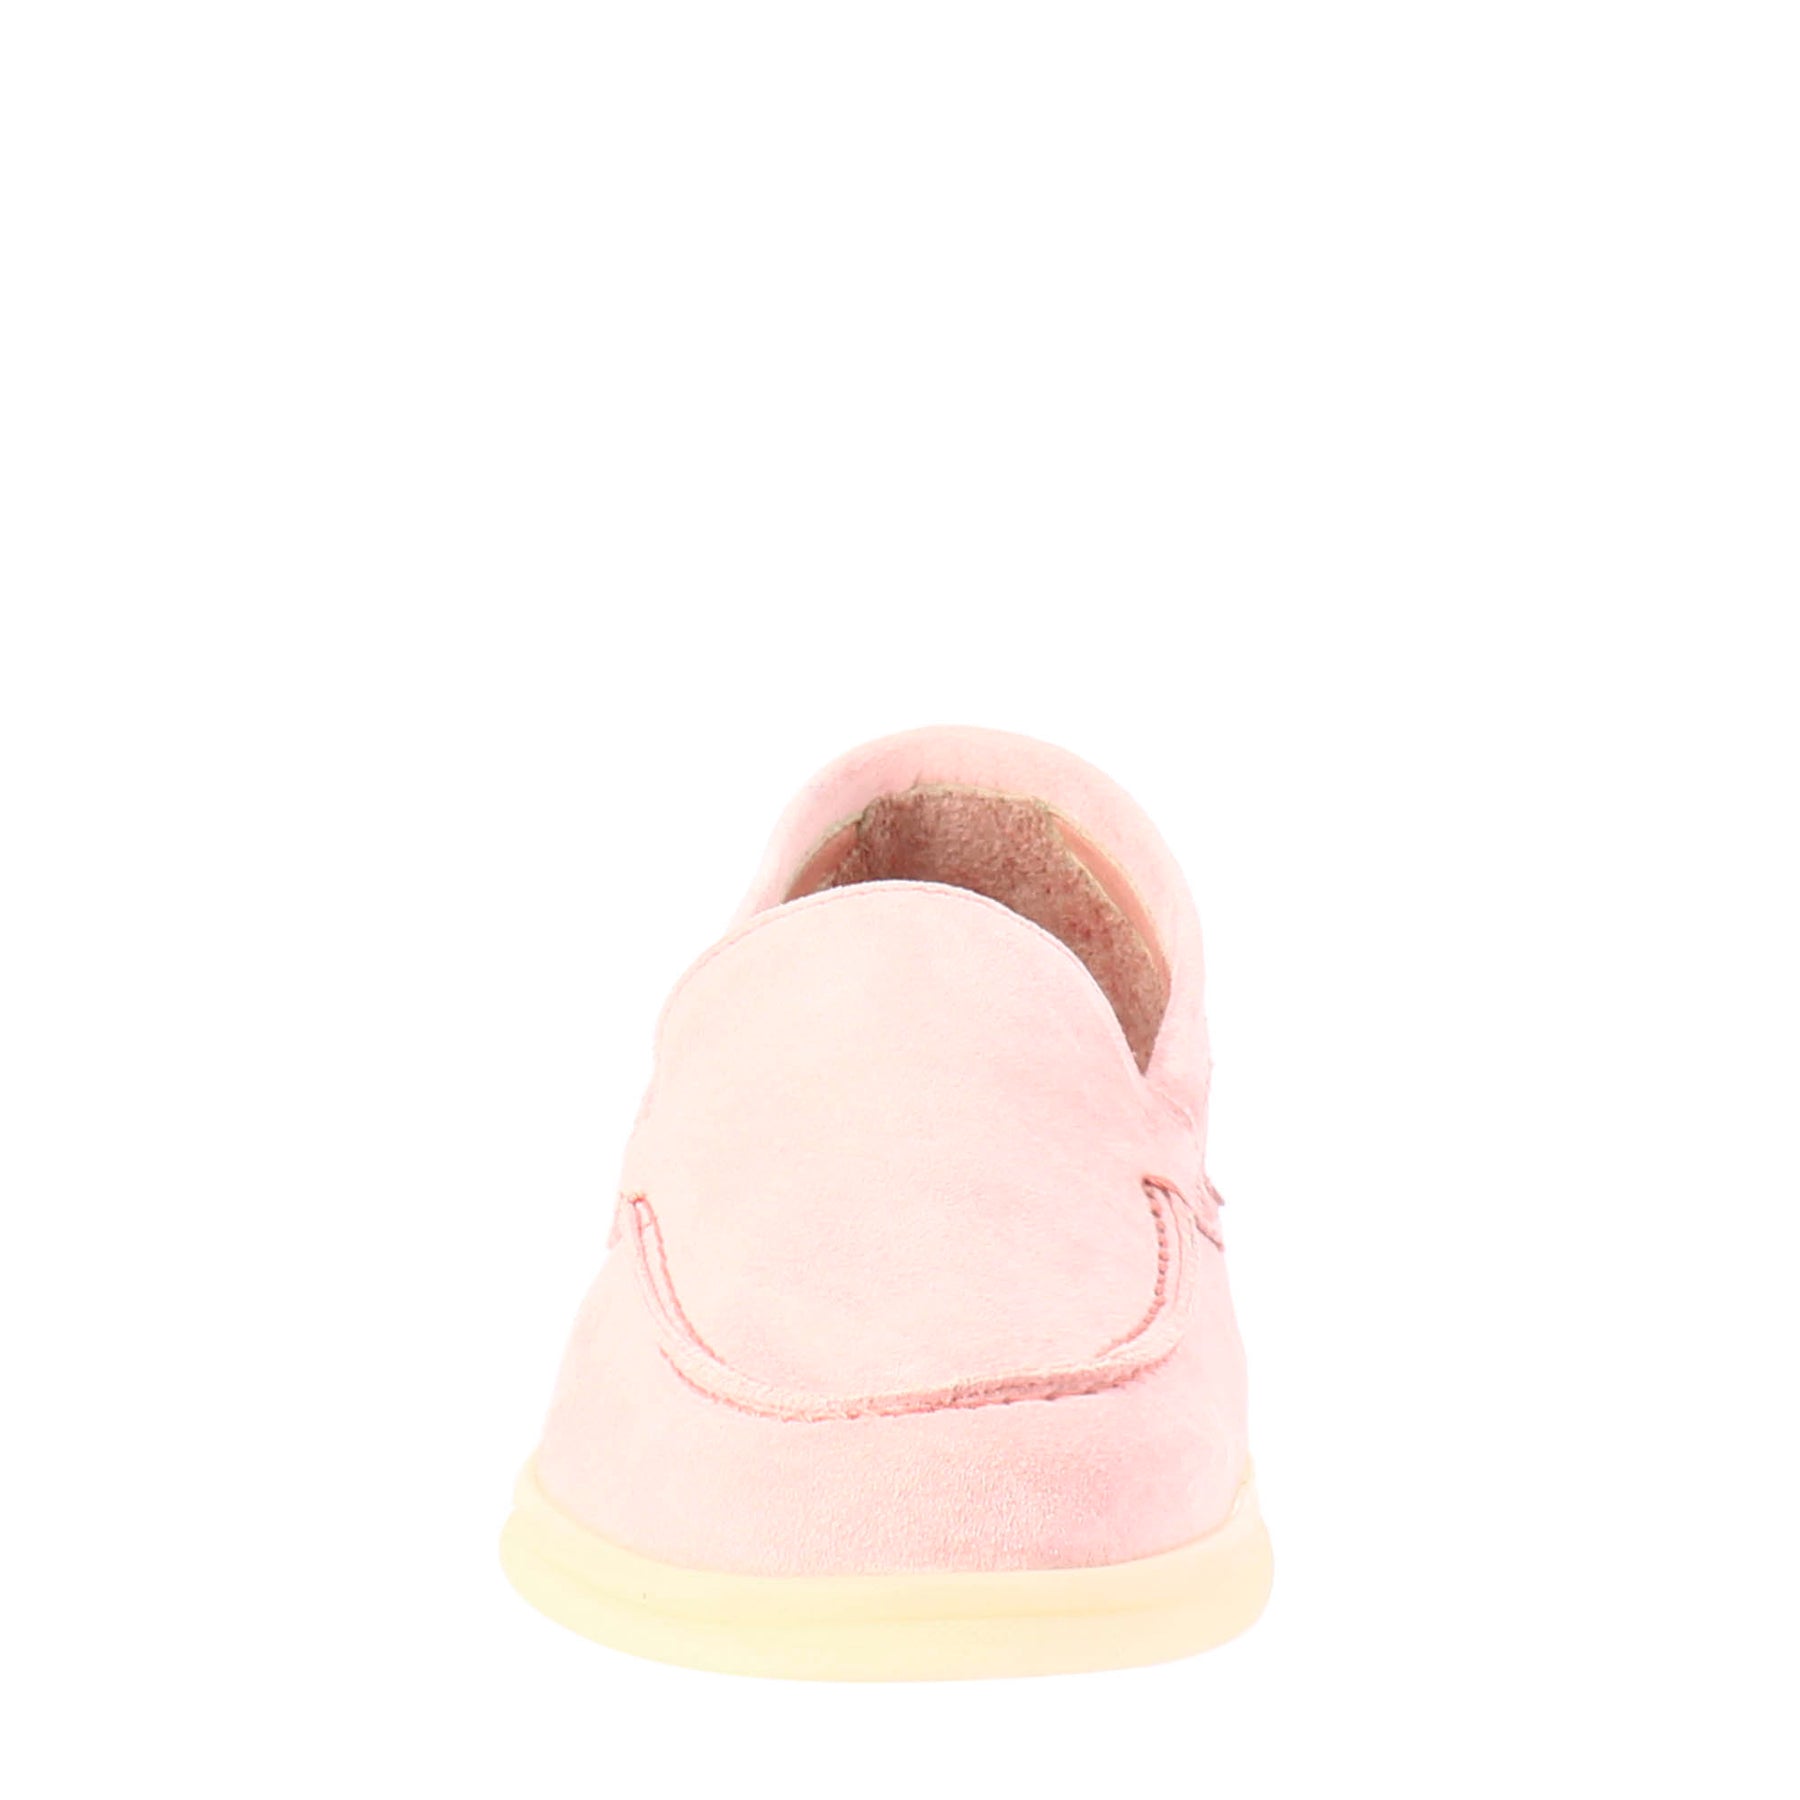 Women's flexible moccasin in pink suede leather